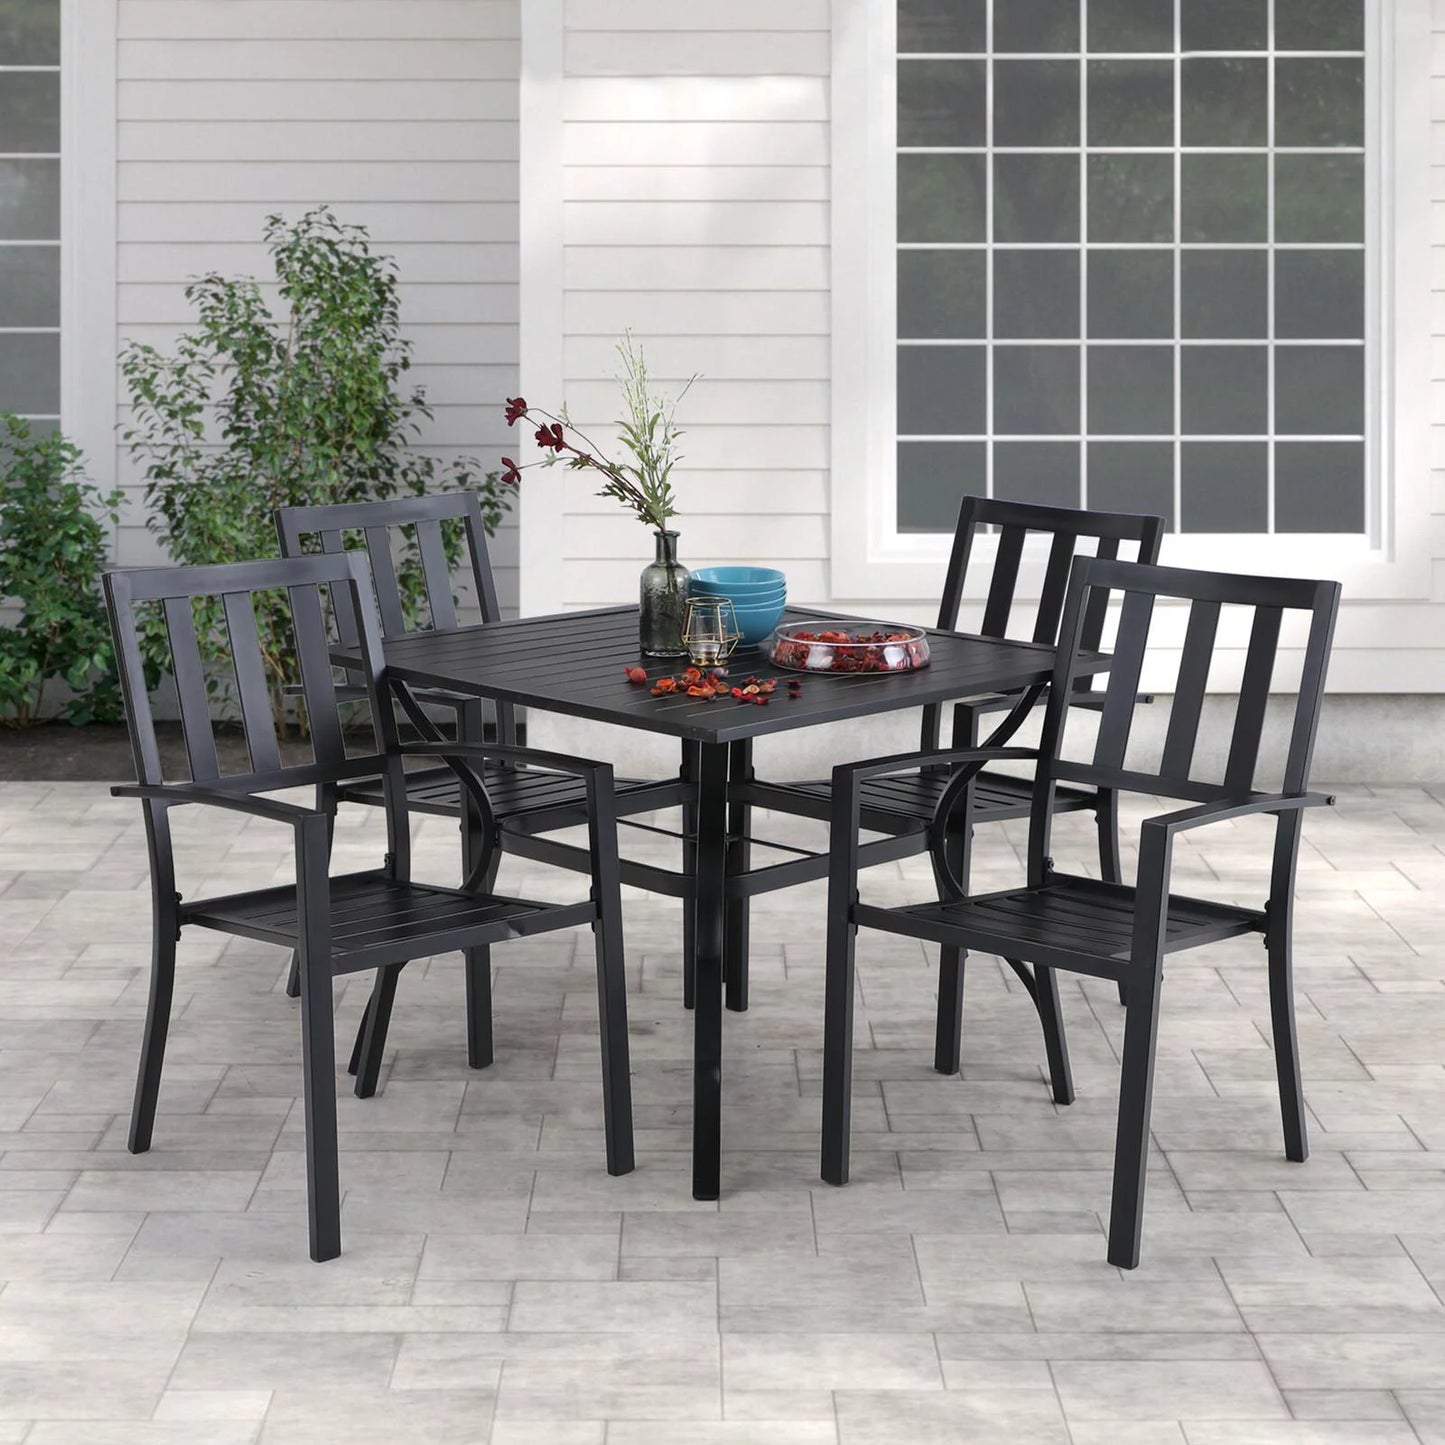 Sophia & William 5 Pcs Metal Patio Dining Set with 4 Stackable Chairs and Table in Black